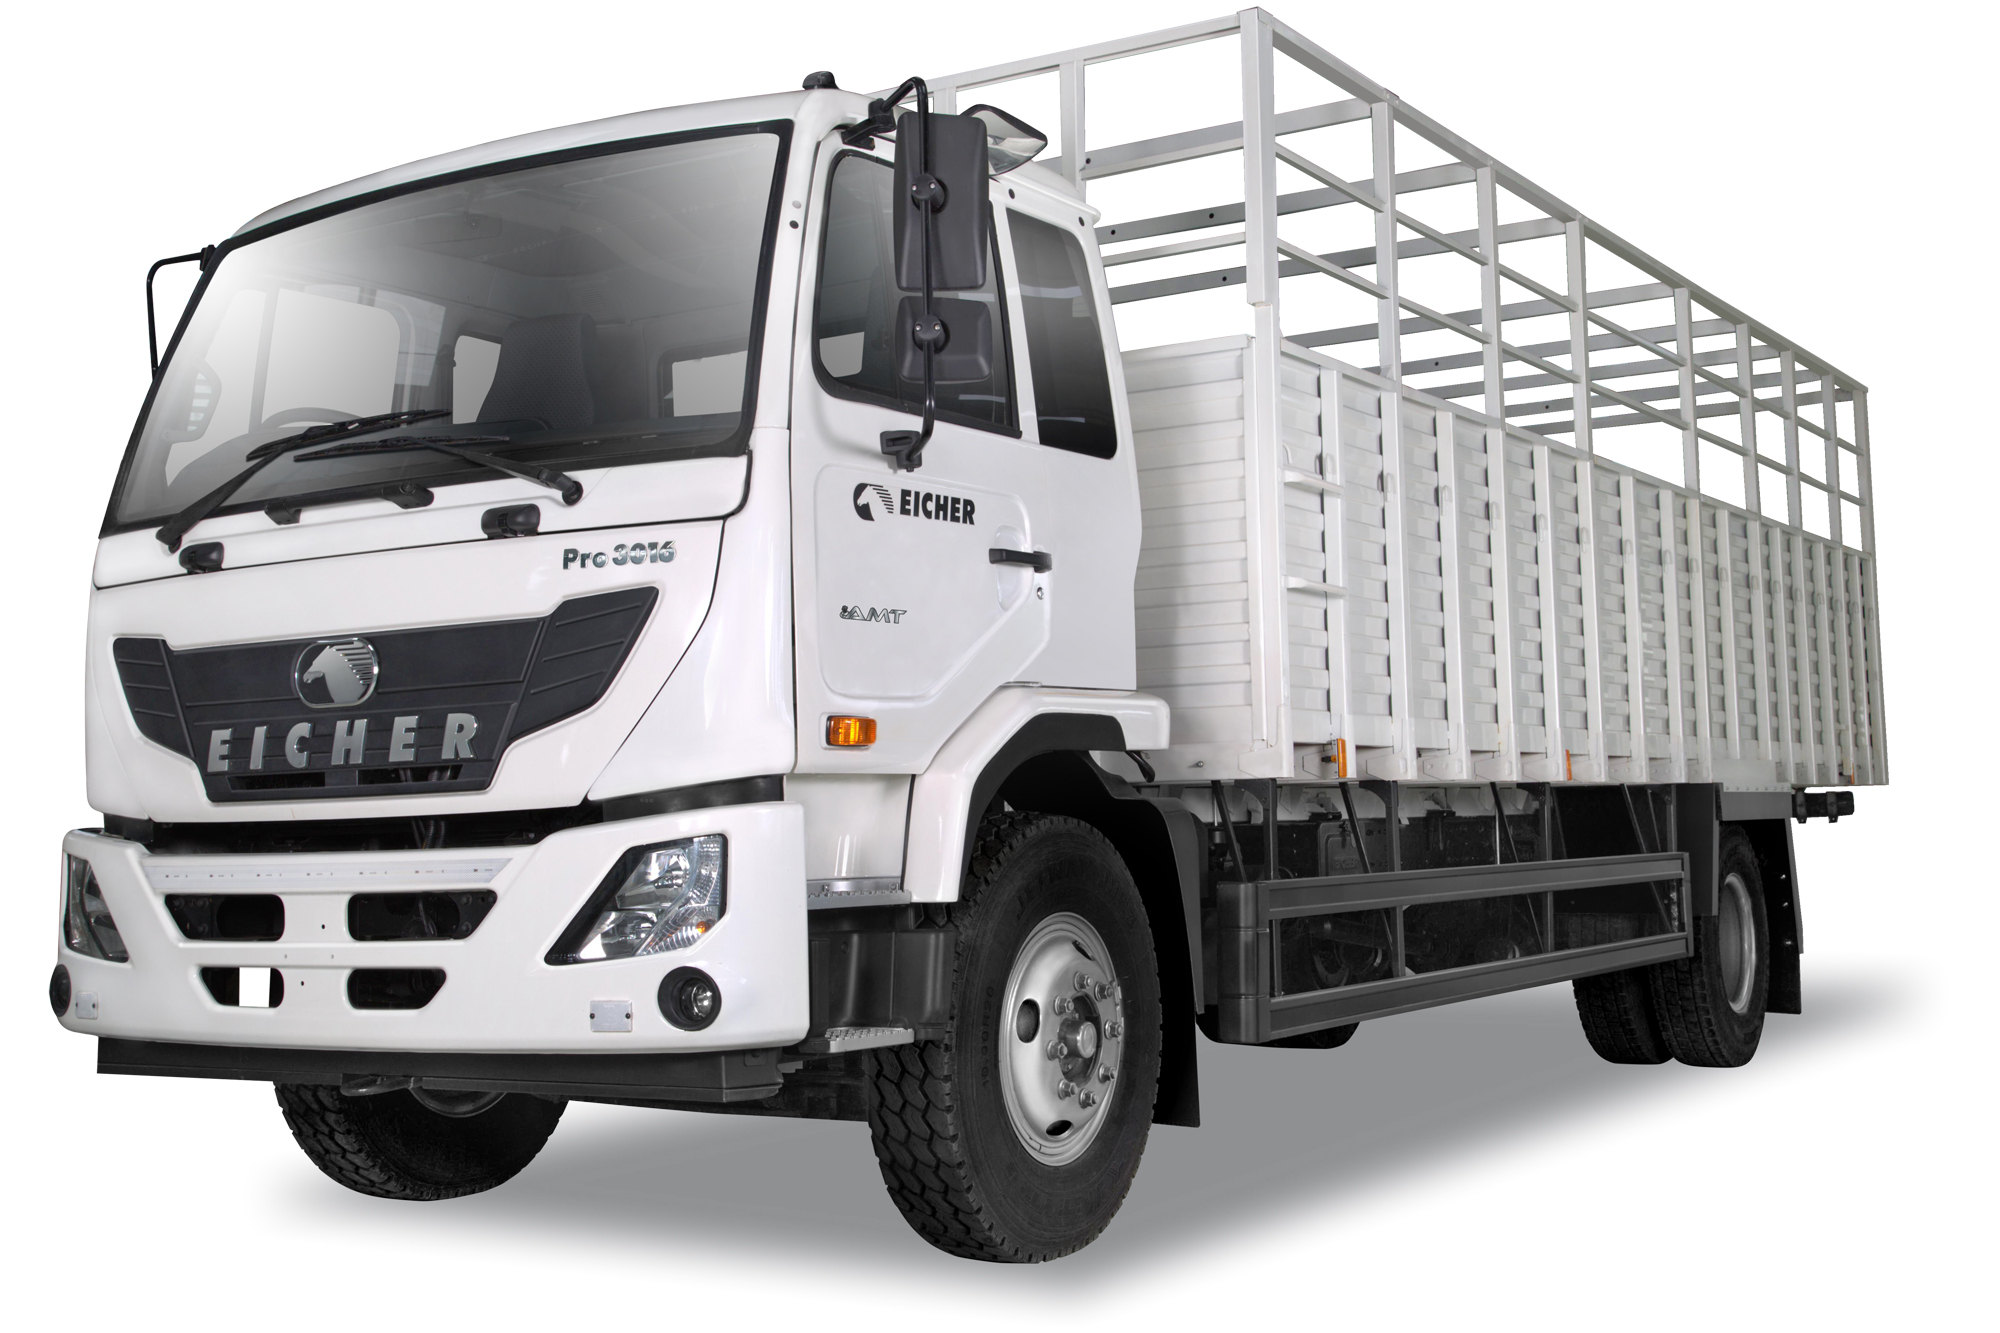  Eicher  introduces AMT truck  in 16T category B2B 